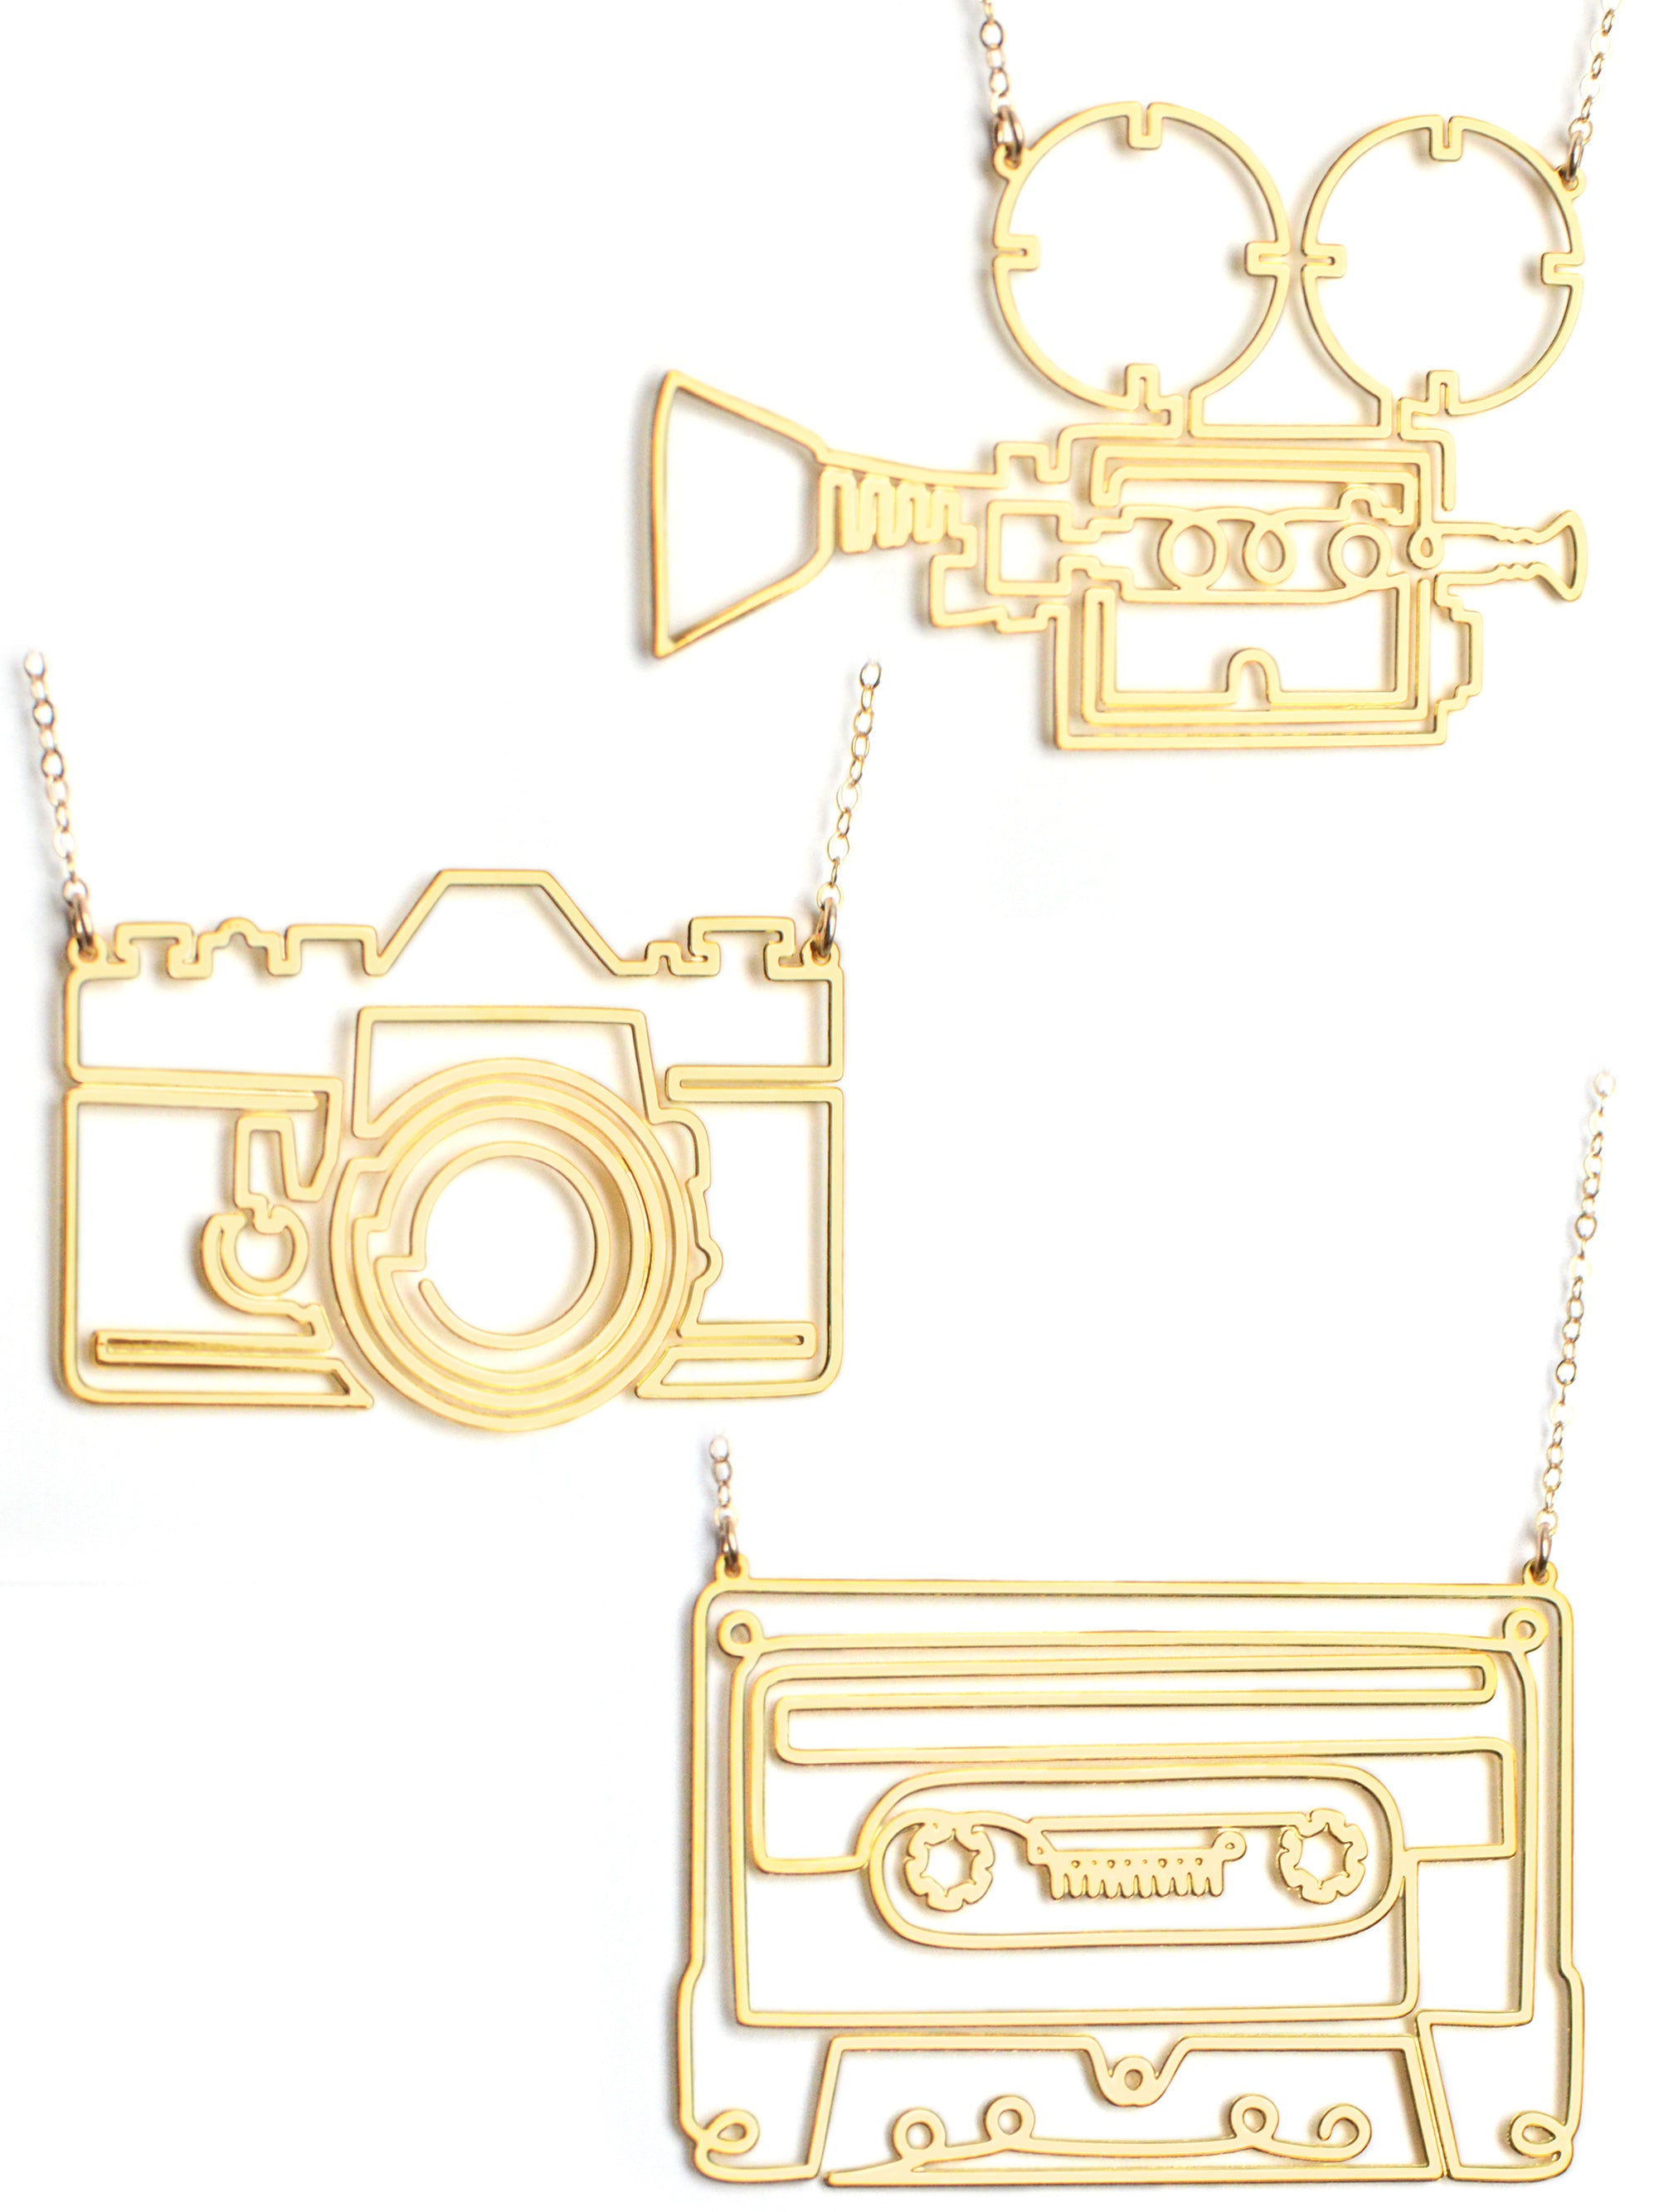 Creators Gift Set - High Quality, Hand Drawn, Creators Gift Set Necklaces - Featuring the Cassette, Photo Camera, Film Camera, and Slate Necklaces - Available in Gold and Silver - Made in USA - Brevity Jewelry